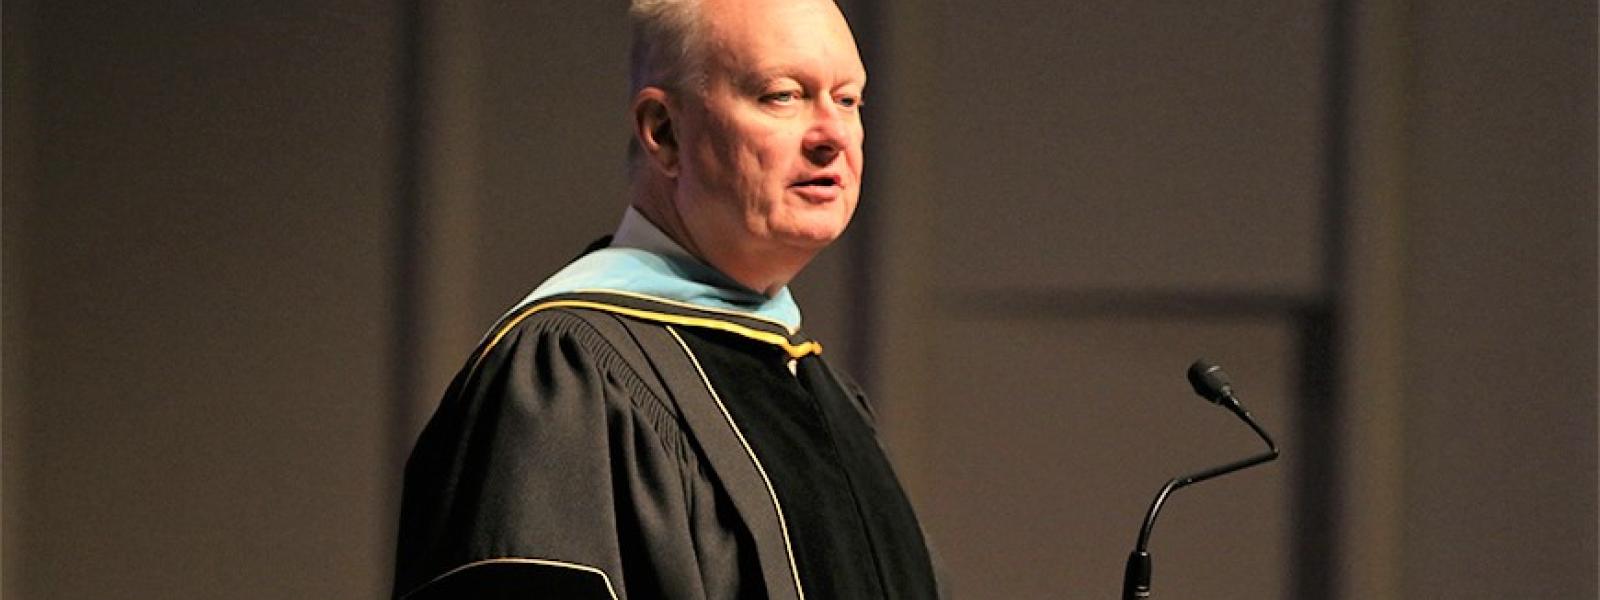 Dr. Ralph Enlow was the keynote speaker at the inauguration of CIU President Dr. Mark Smith.